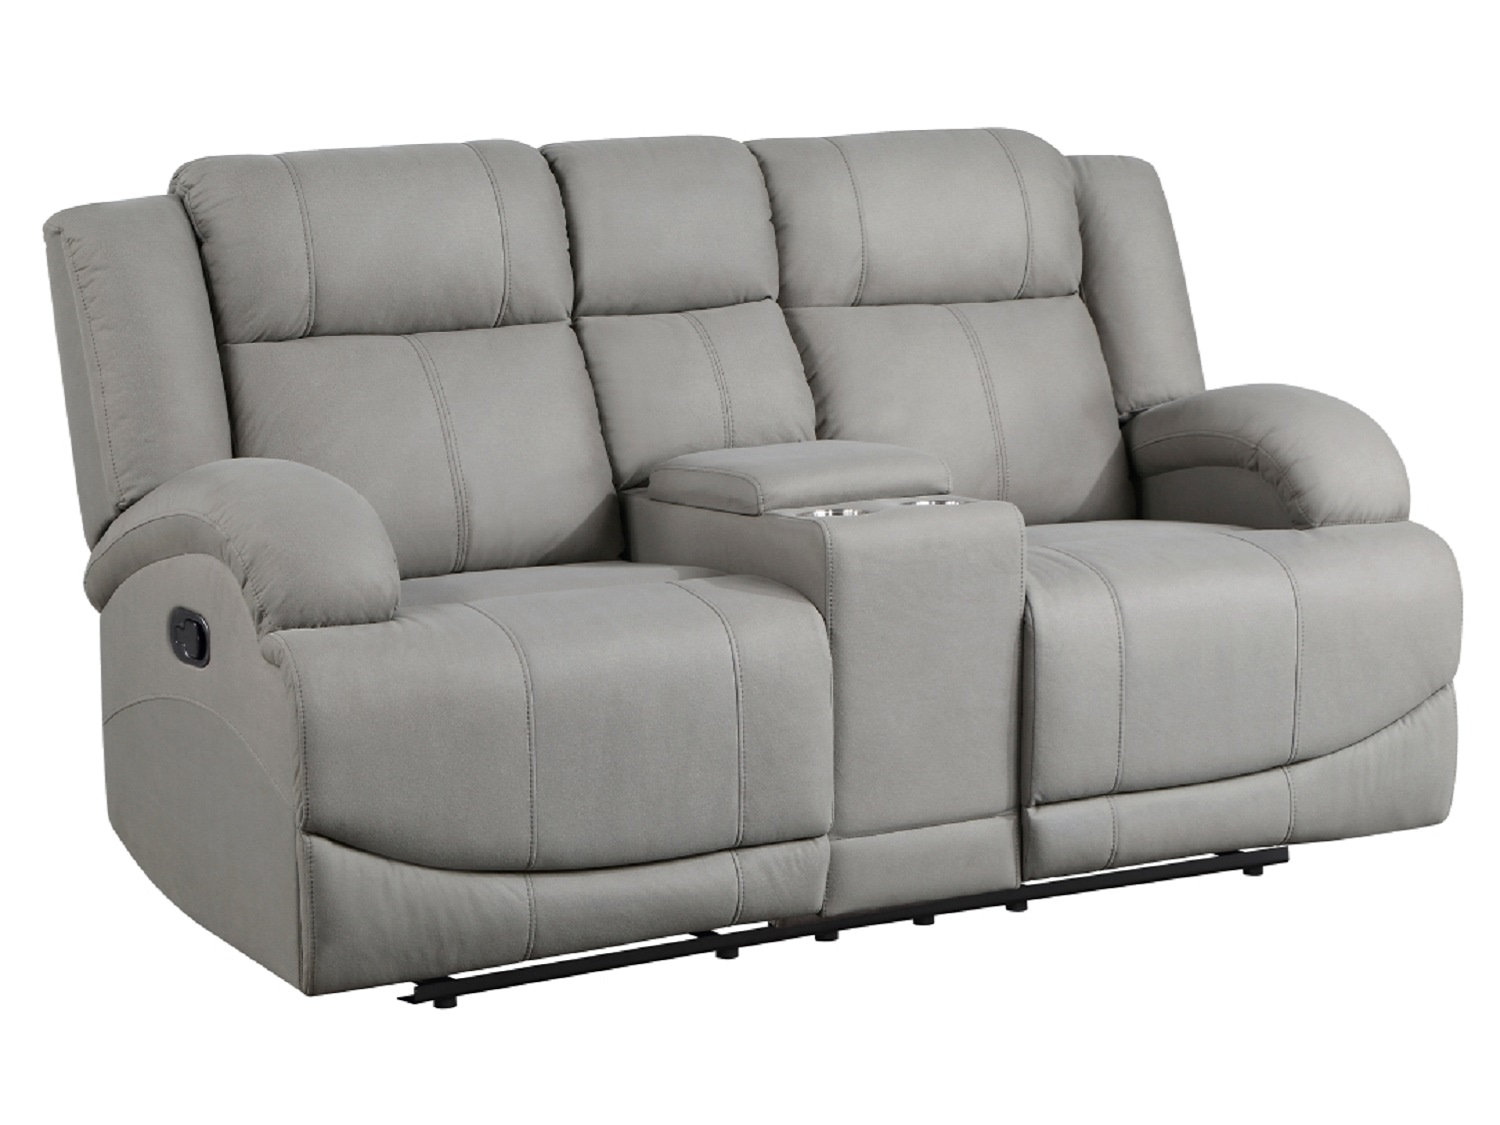 QUINCY Reclining Loveseat with Console -Side